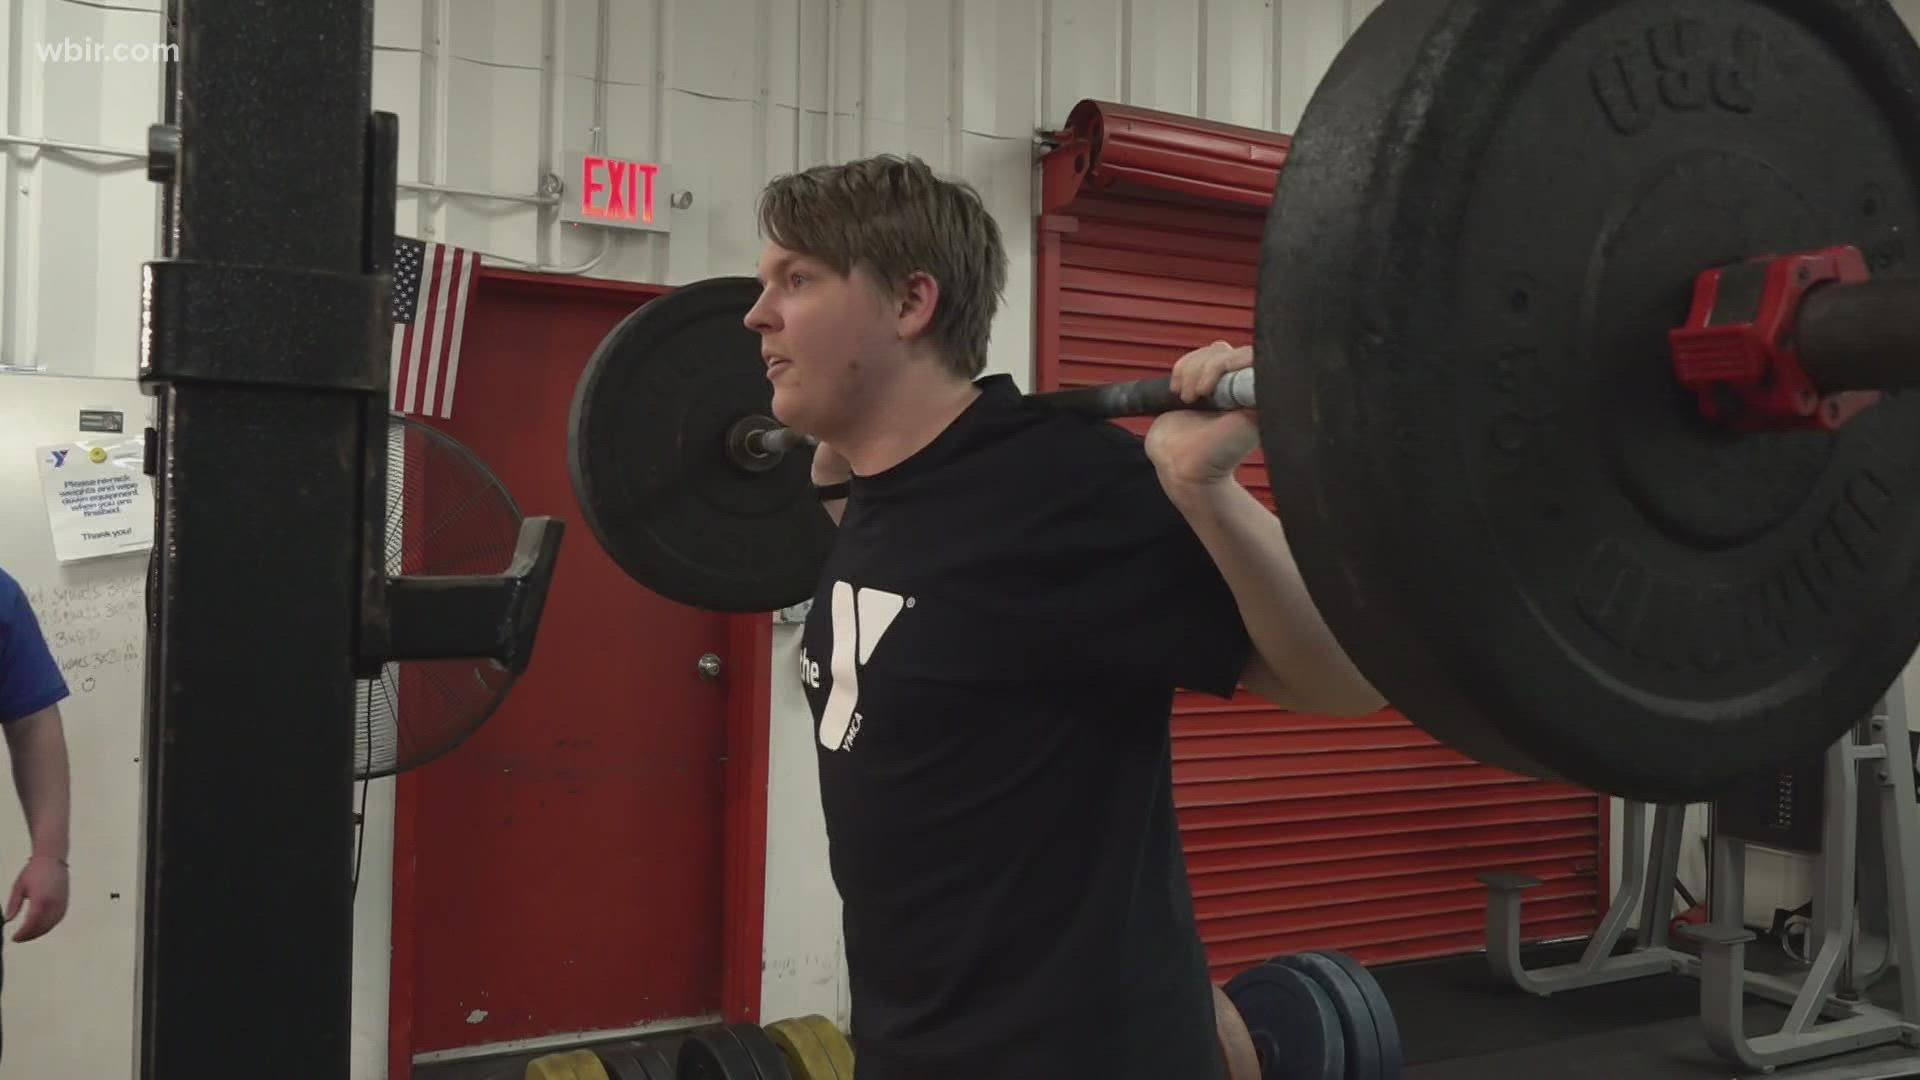 Meet Johnny Kelly! He will be competing in powerlifting.